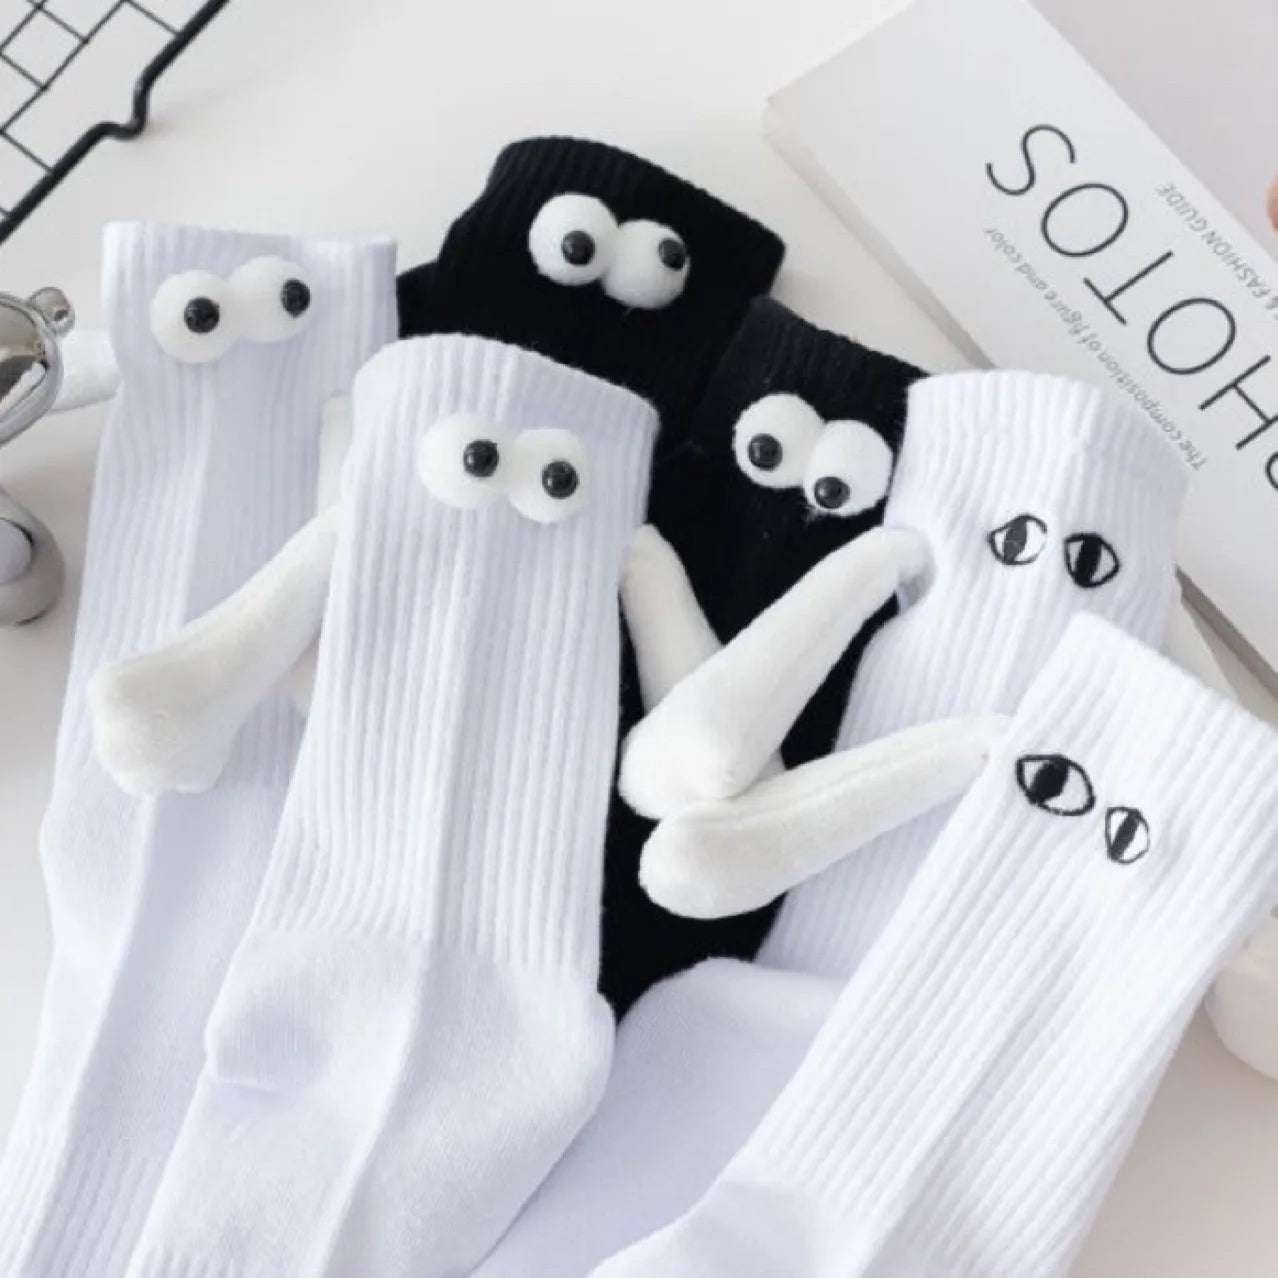 Magnetic Socks with Hands Women Men Fashion Black Couple Mid-tube Socks for Gifts || Neoraid